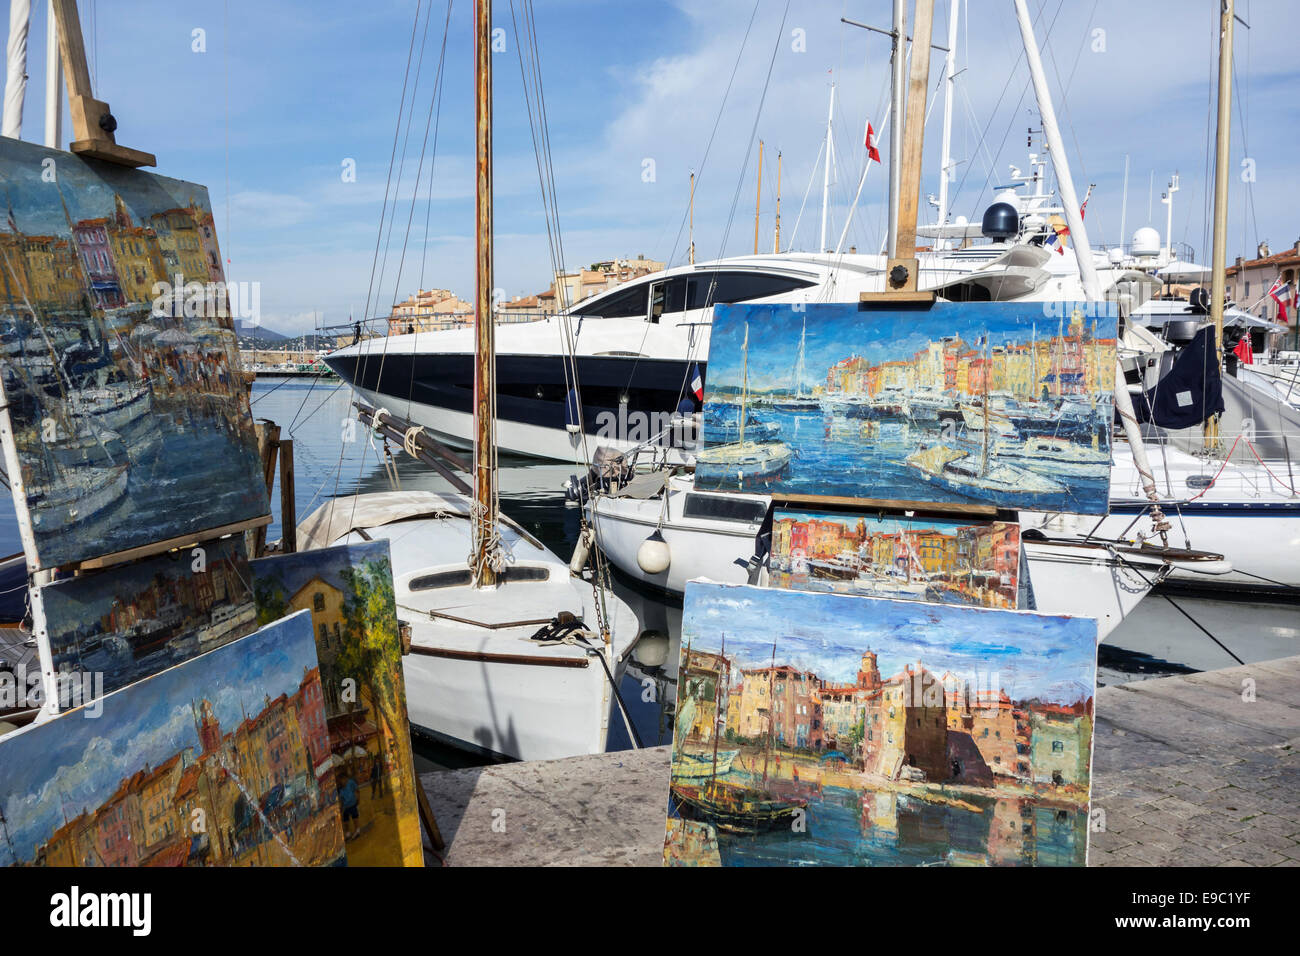 Artist selling paintings in the vieux port / old harbour of  Saint-Tropez along the French Riviera, Var, Alpes-Maritimes, France Stock Photo